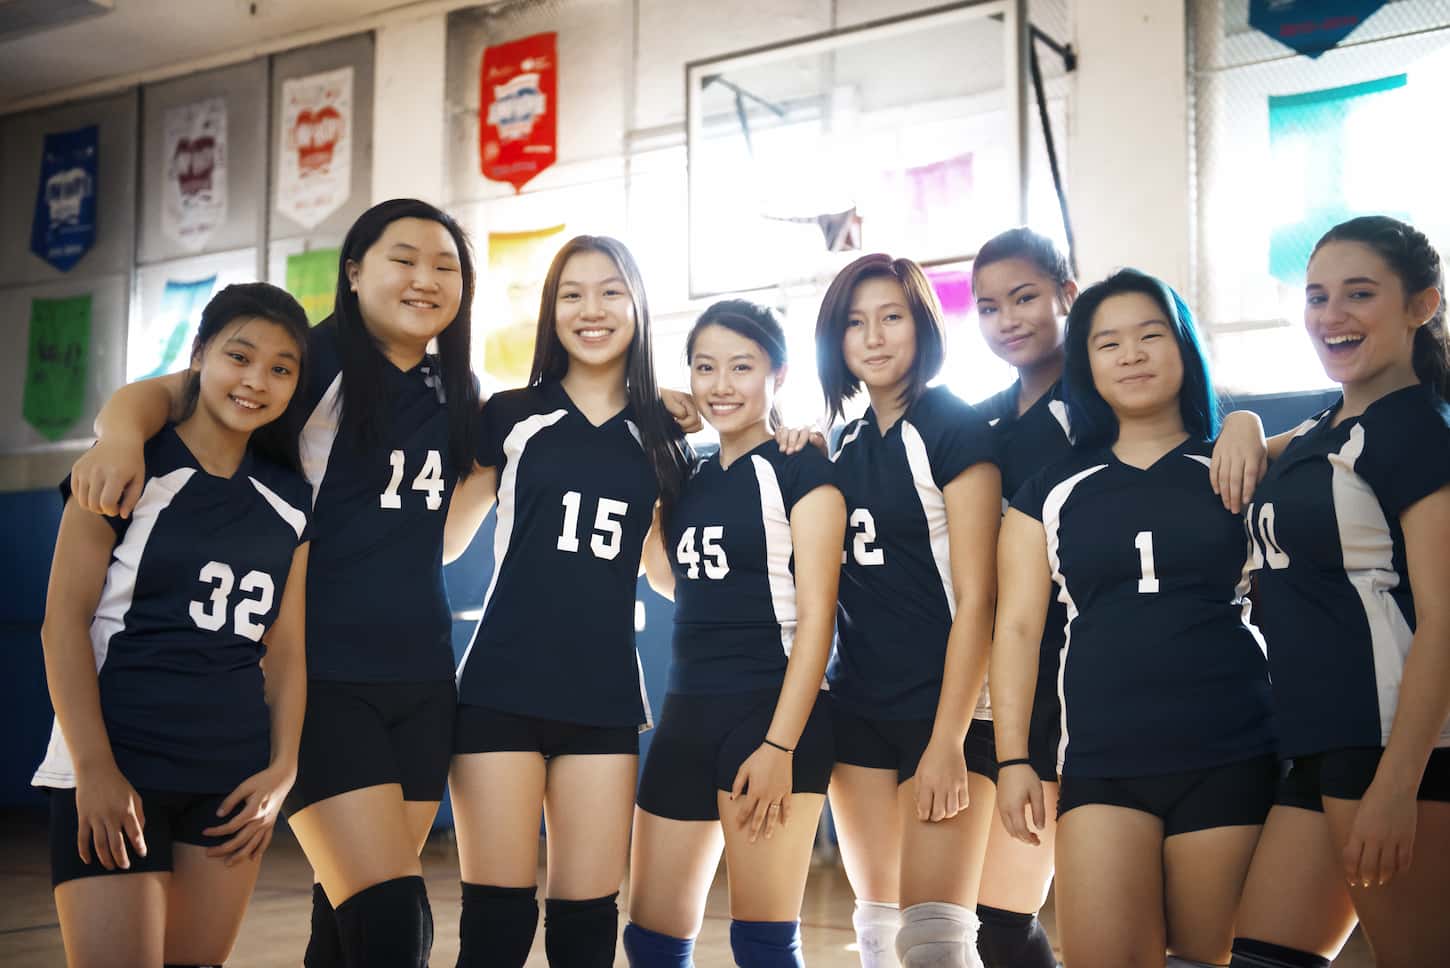 An image Of Teenage Girls Volleyball Team On the Court.